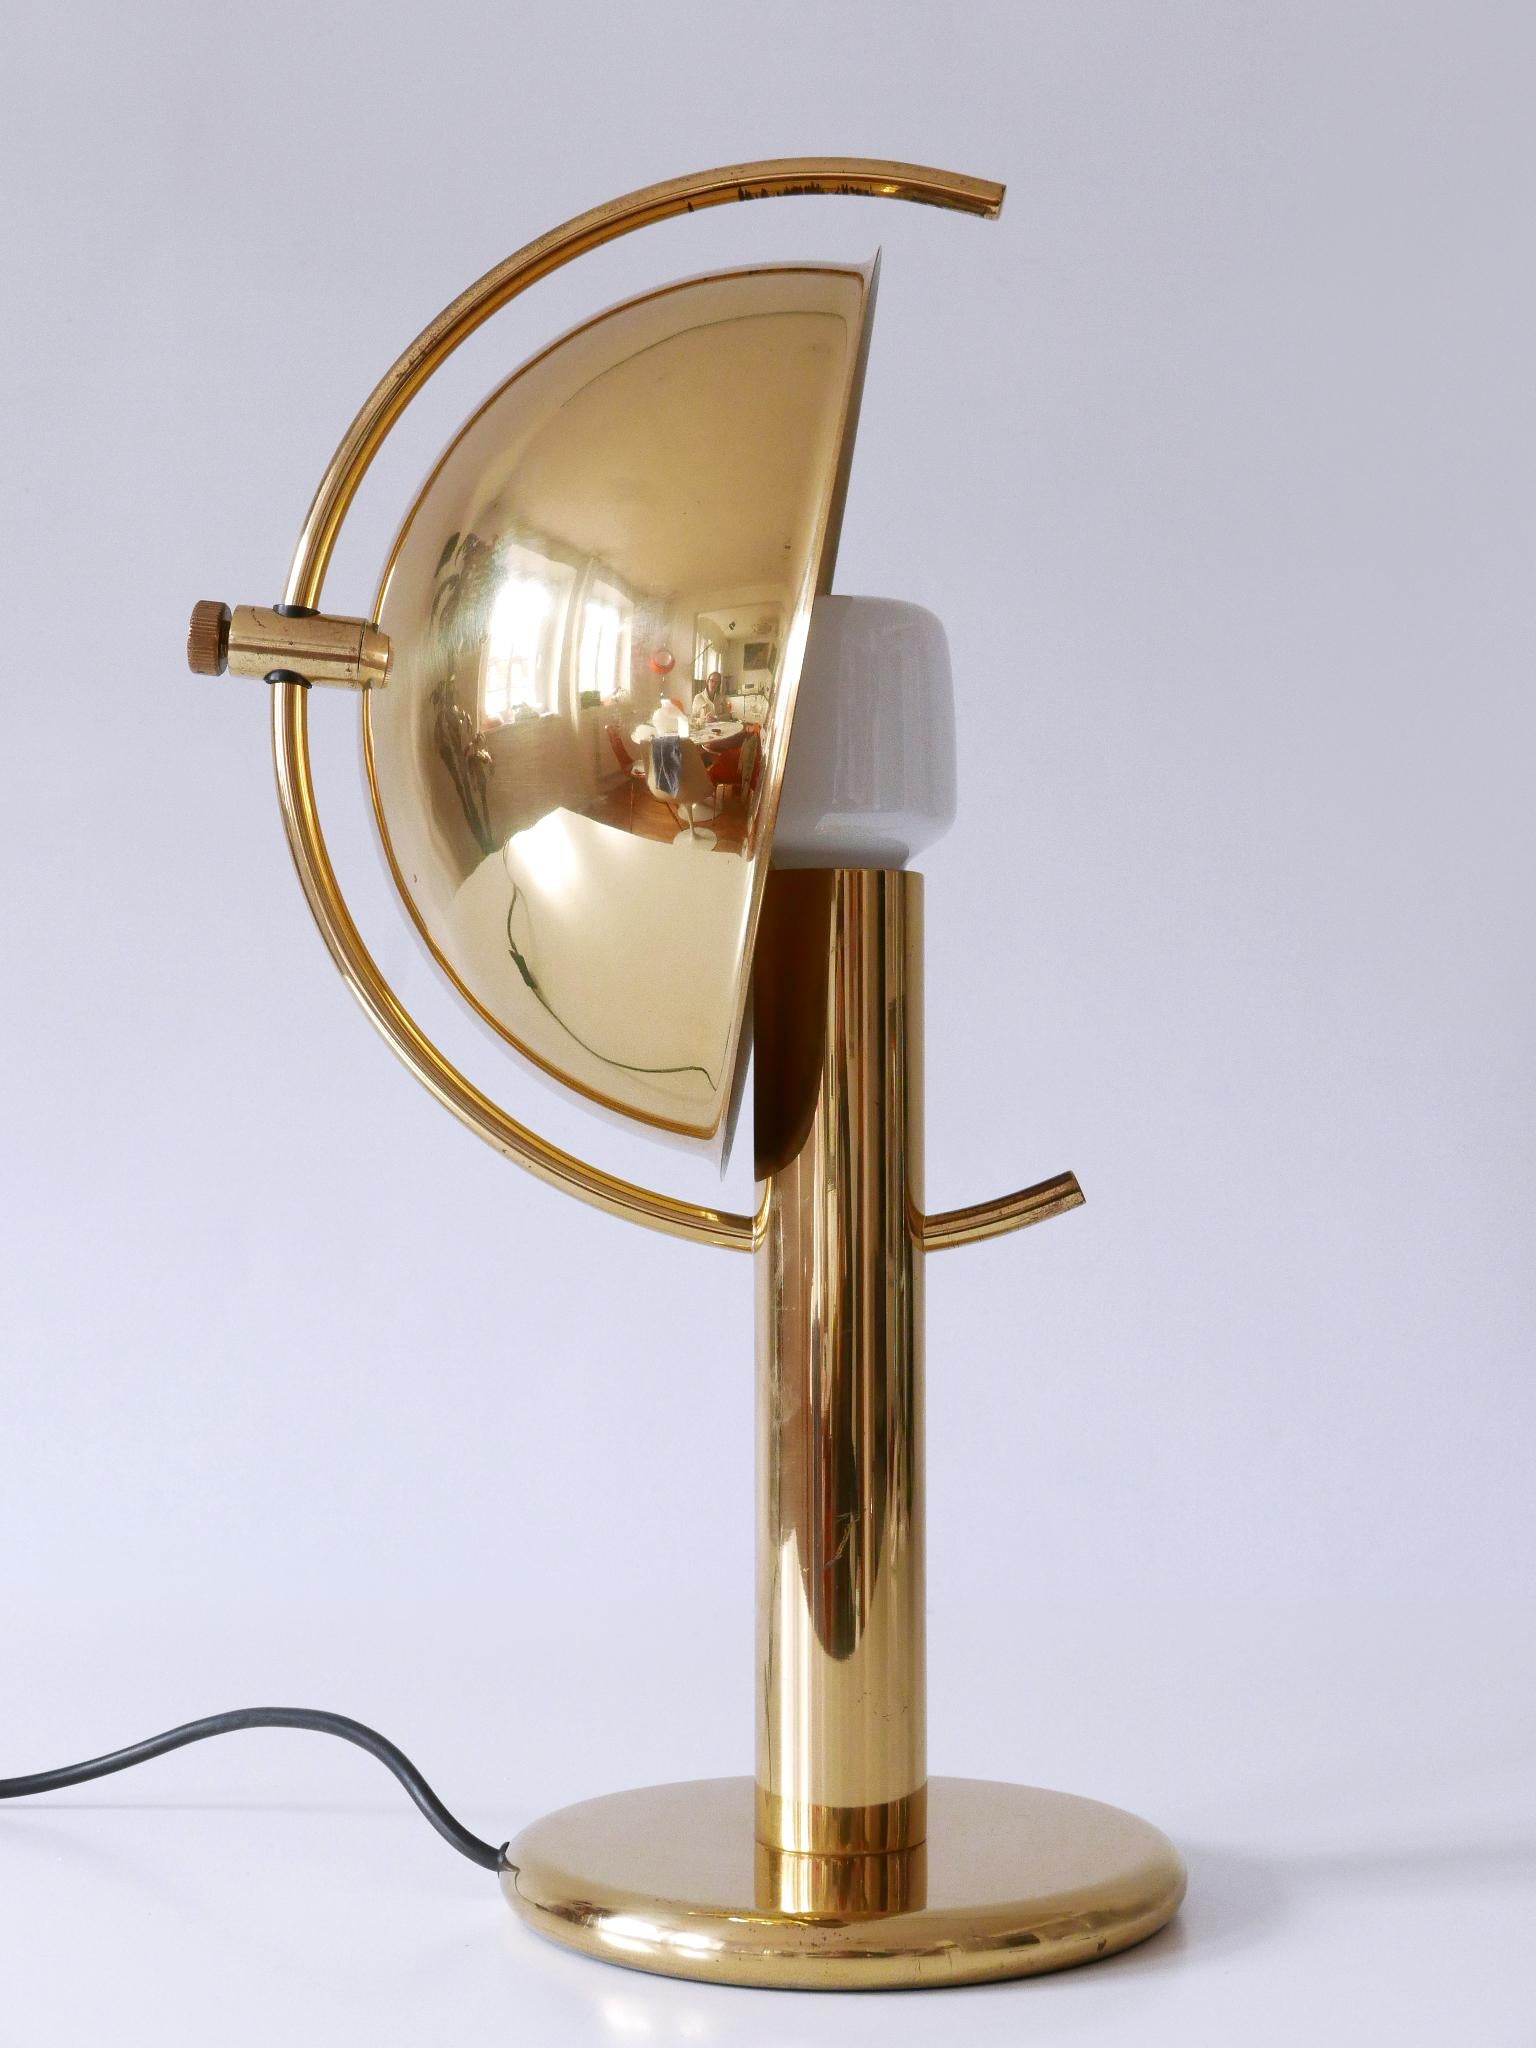 Exceptional, elegant and highly decorative Mid-Century Modern brass table lamp with adjustable lamp shade. Designed and manufactured by Gebrüder Cosack, Germany, 1960s.

Executed in massive brass sheet and tube, the lamp comes with 1 x E27 / E26